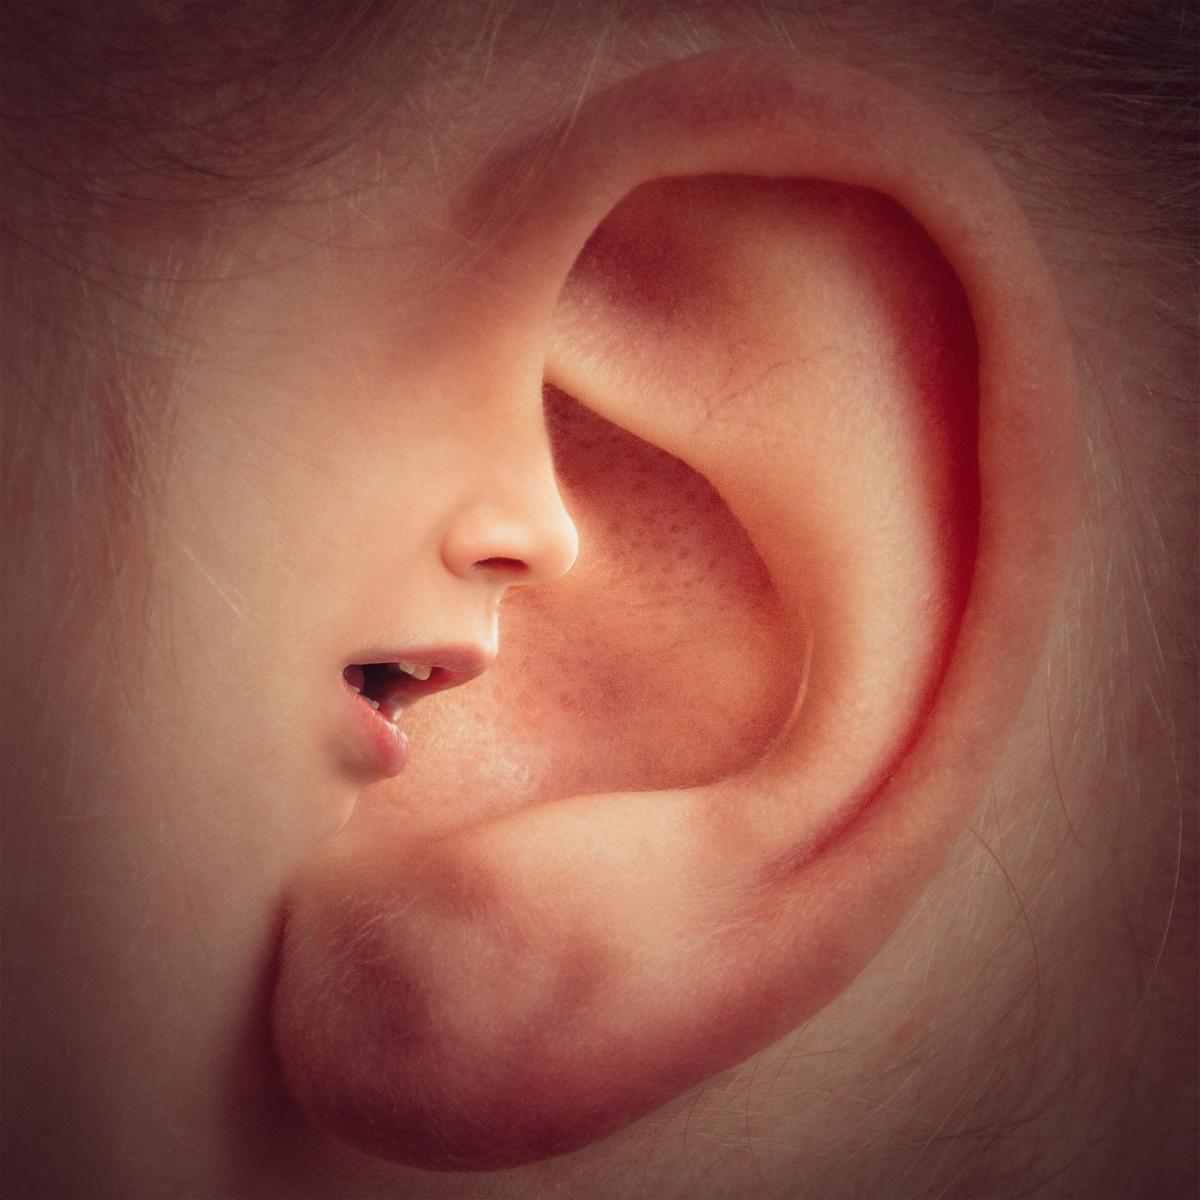 Ear with superimposed face on it.